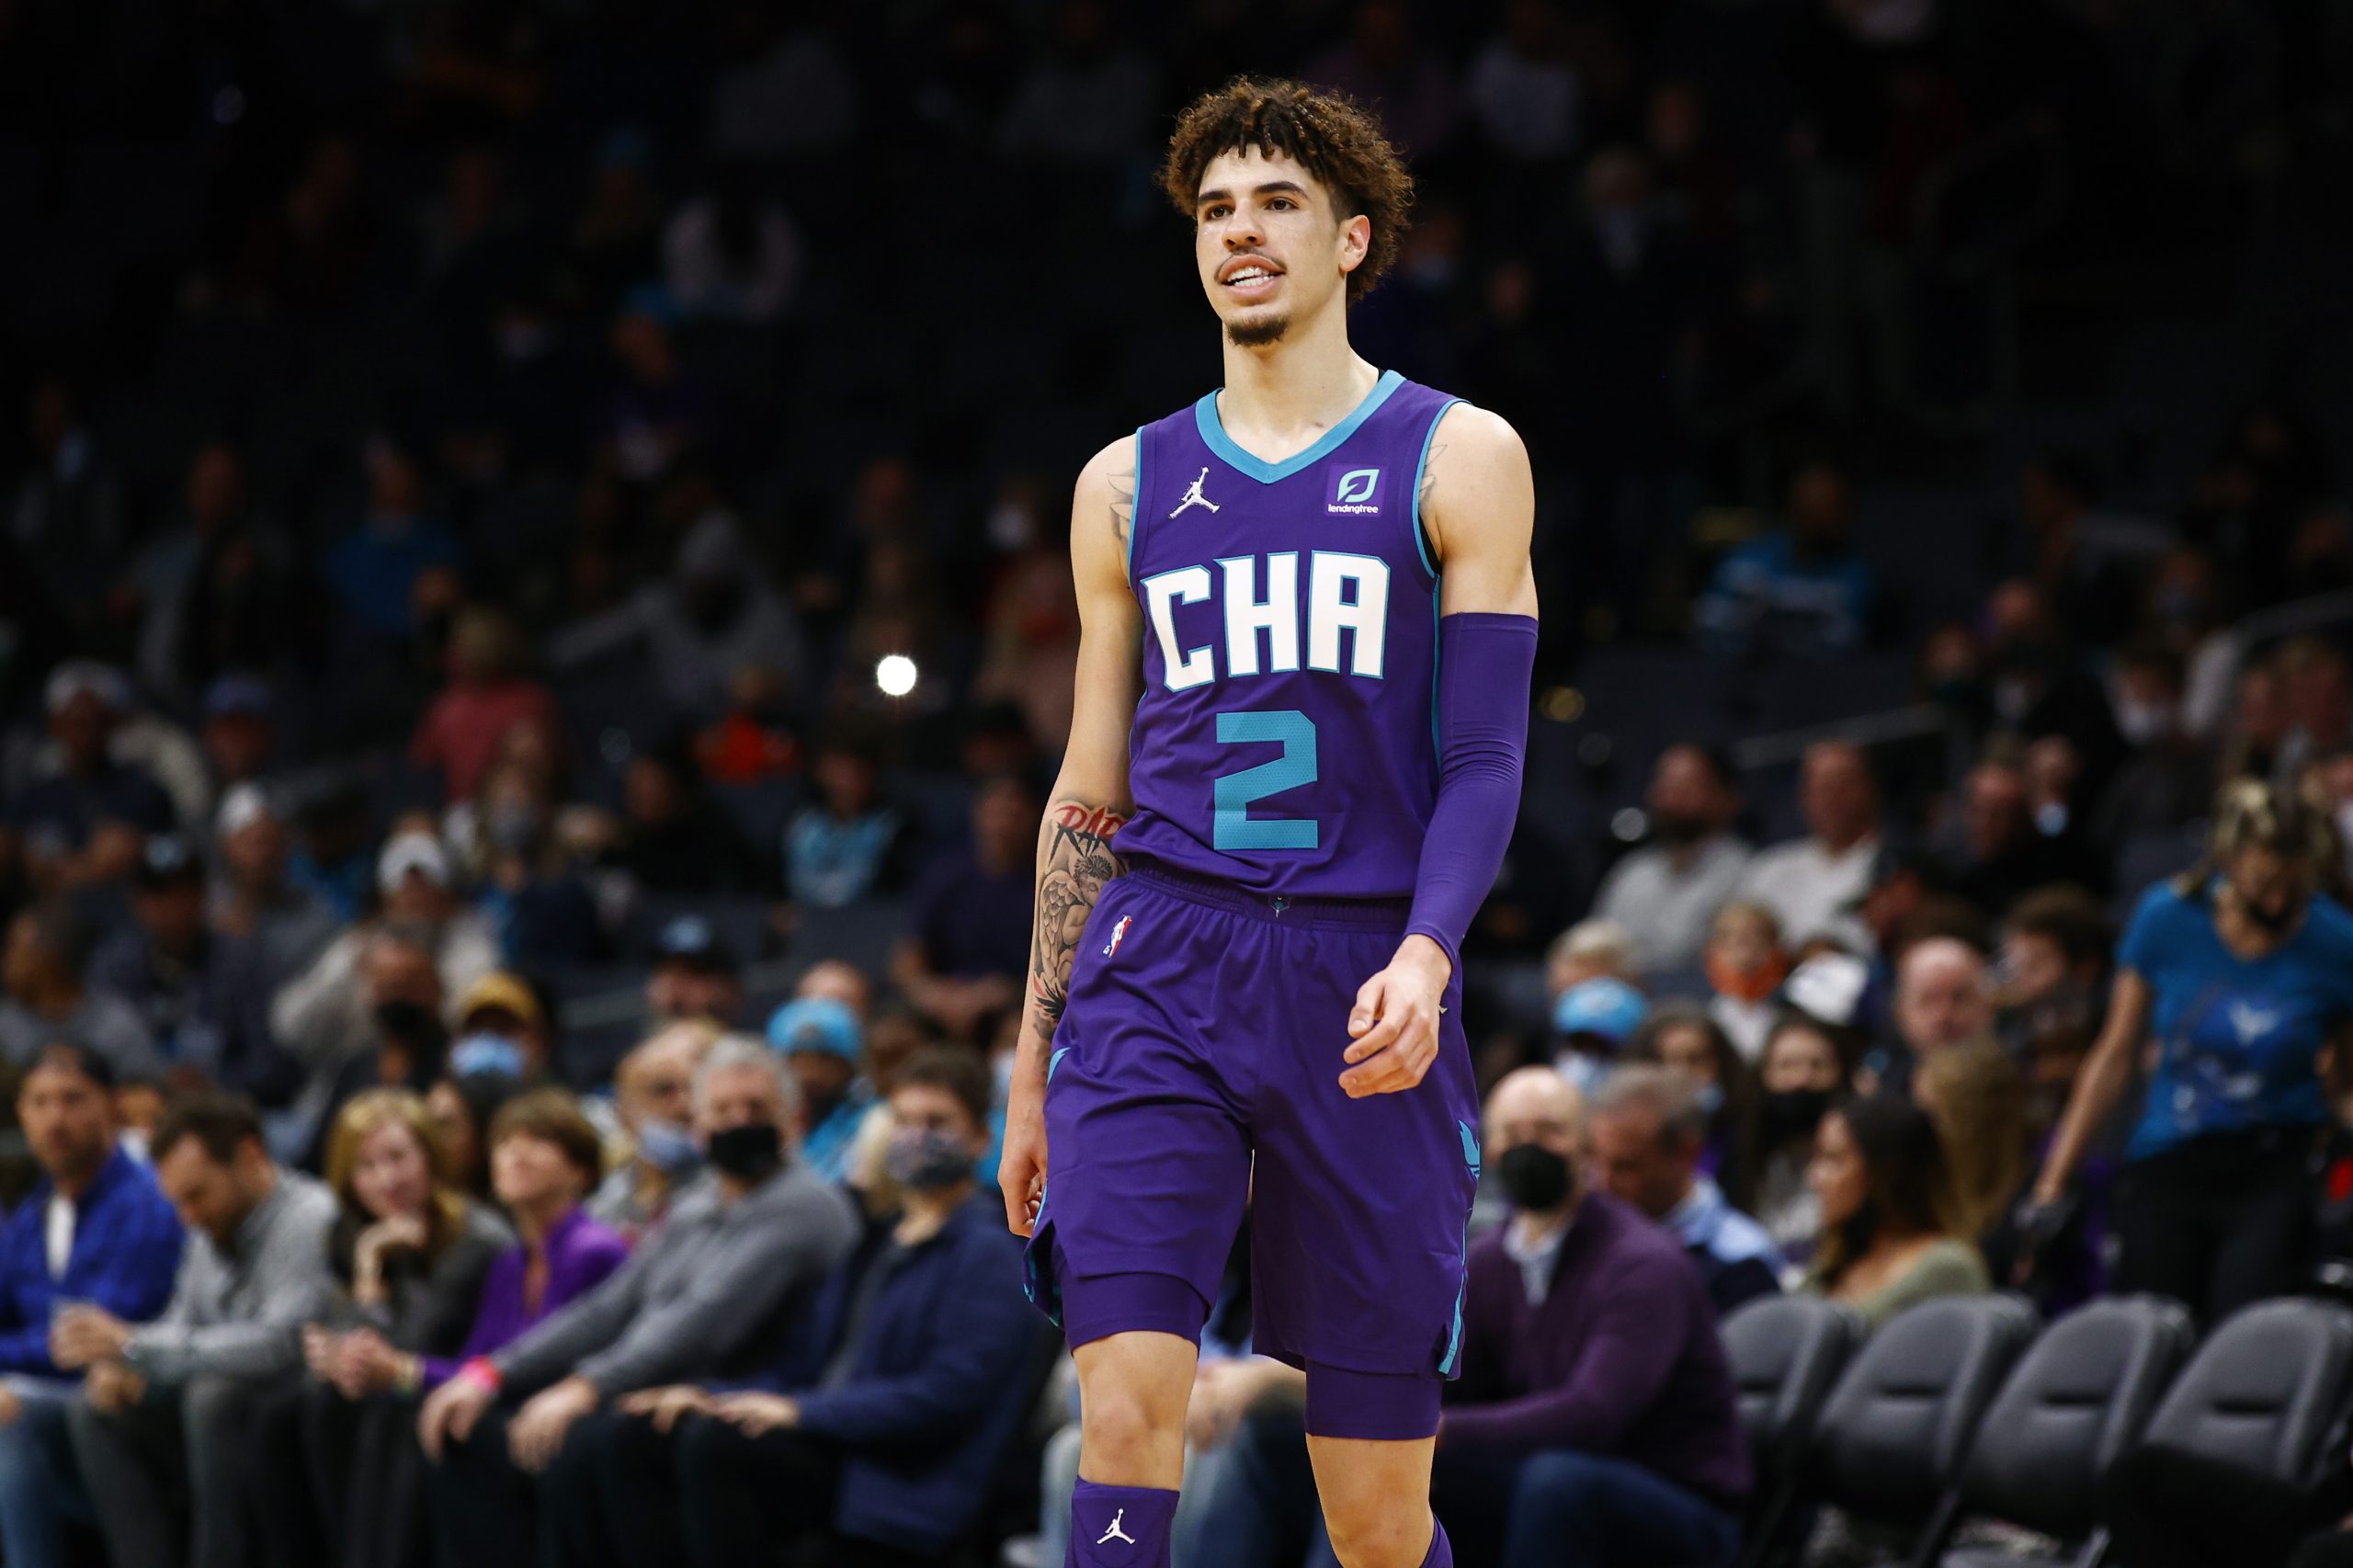 LaMelo Ball of the Charlotte Hornets looks on following a play.